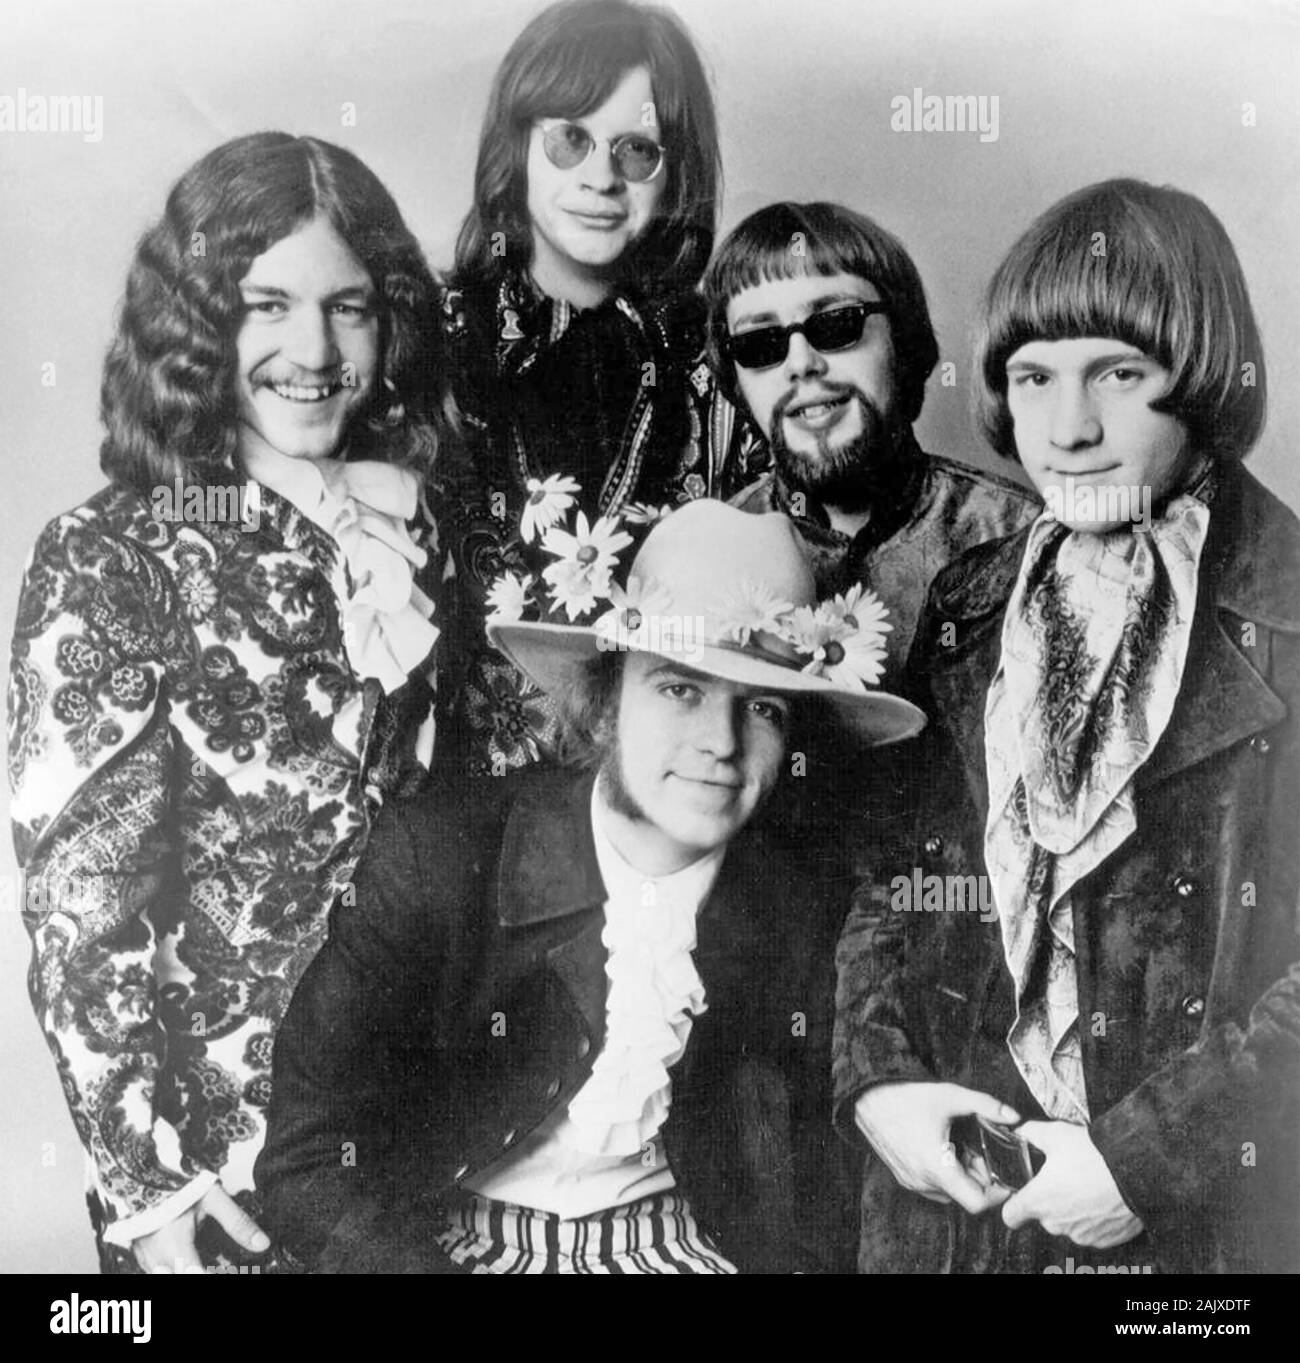 THE LEMON PIPERS Promotional photo of American rock group about 1968 Stock Photo